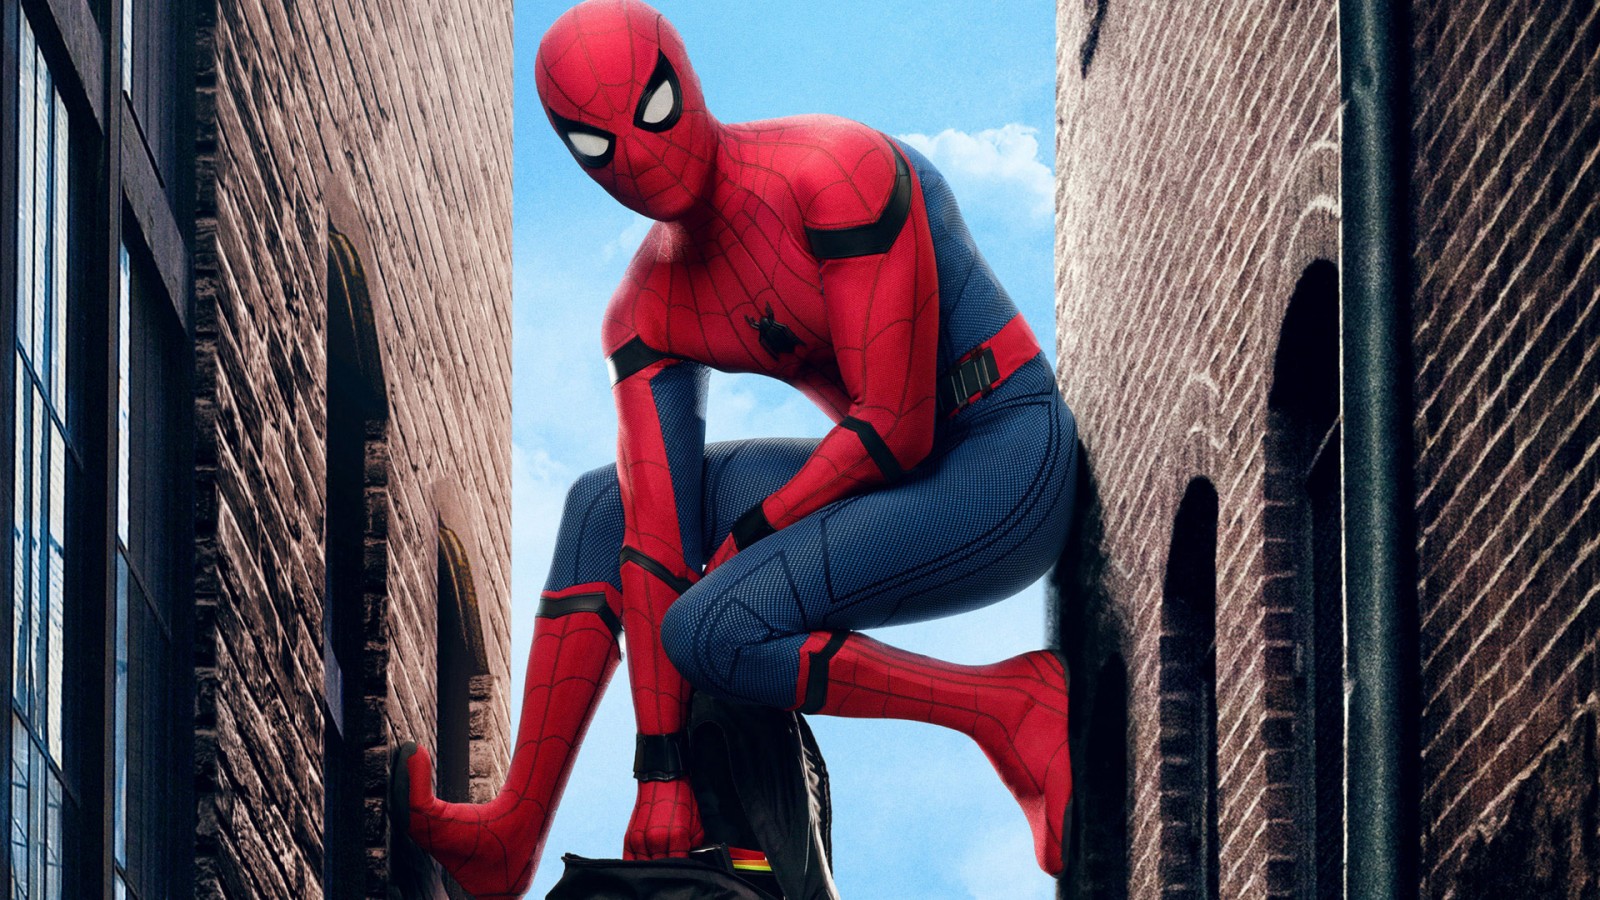 Spiderman Homecoming Movie Hd Wallpaper for Desktop and Mobiles 1600x900 - HD  Wallpaper 